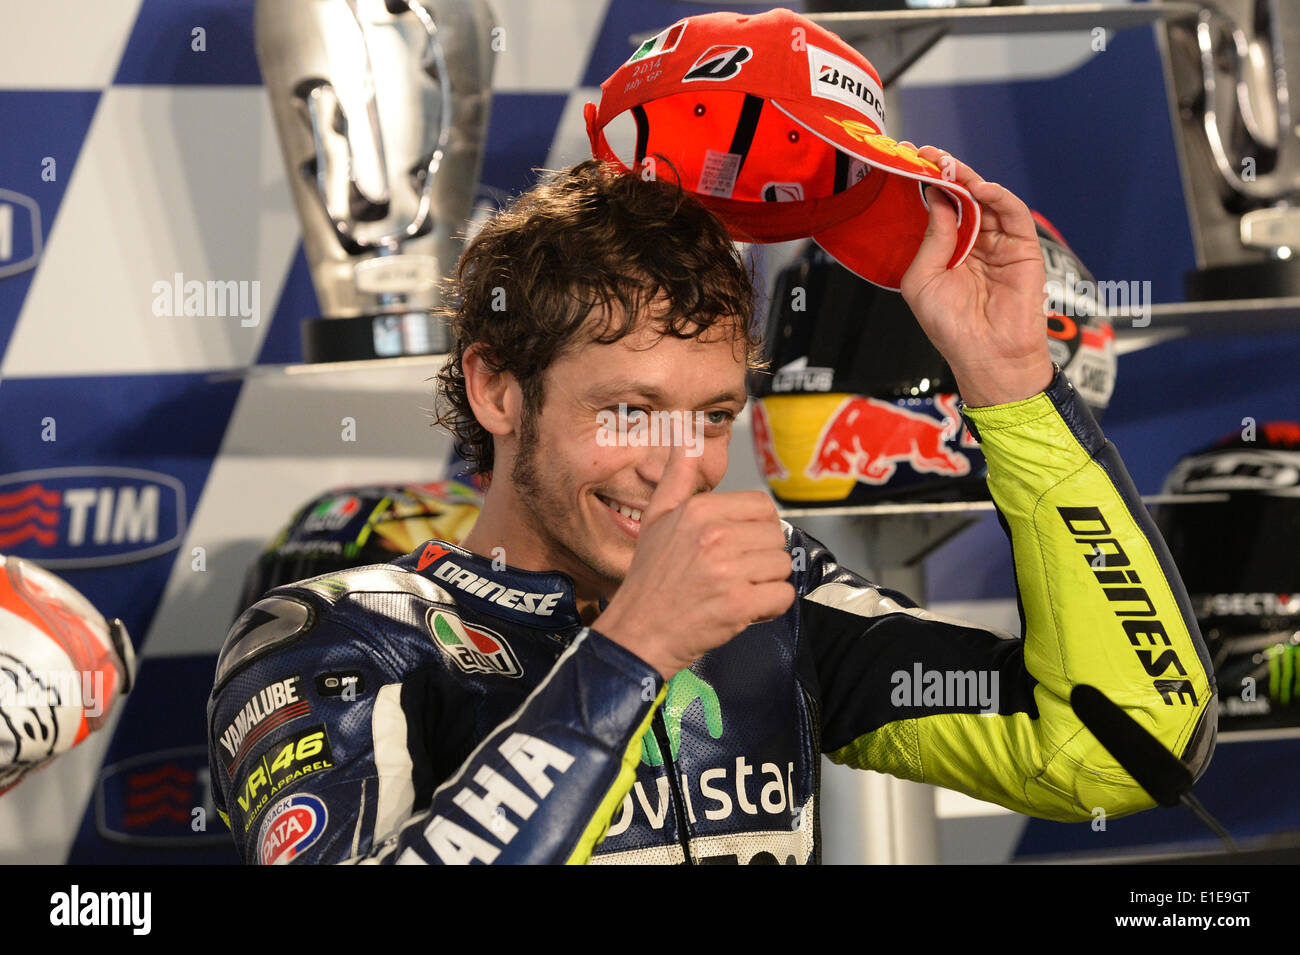 Mugello, Italy. 01st June, 2014. Valentino Rossi (Movistar Yamaha Team) during press conference after race of MotoGP of Italy Credit:  Gaetano Piazzolla/Alamy Live News Stock Photo